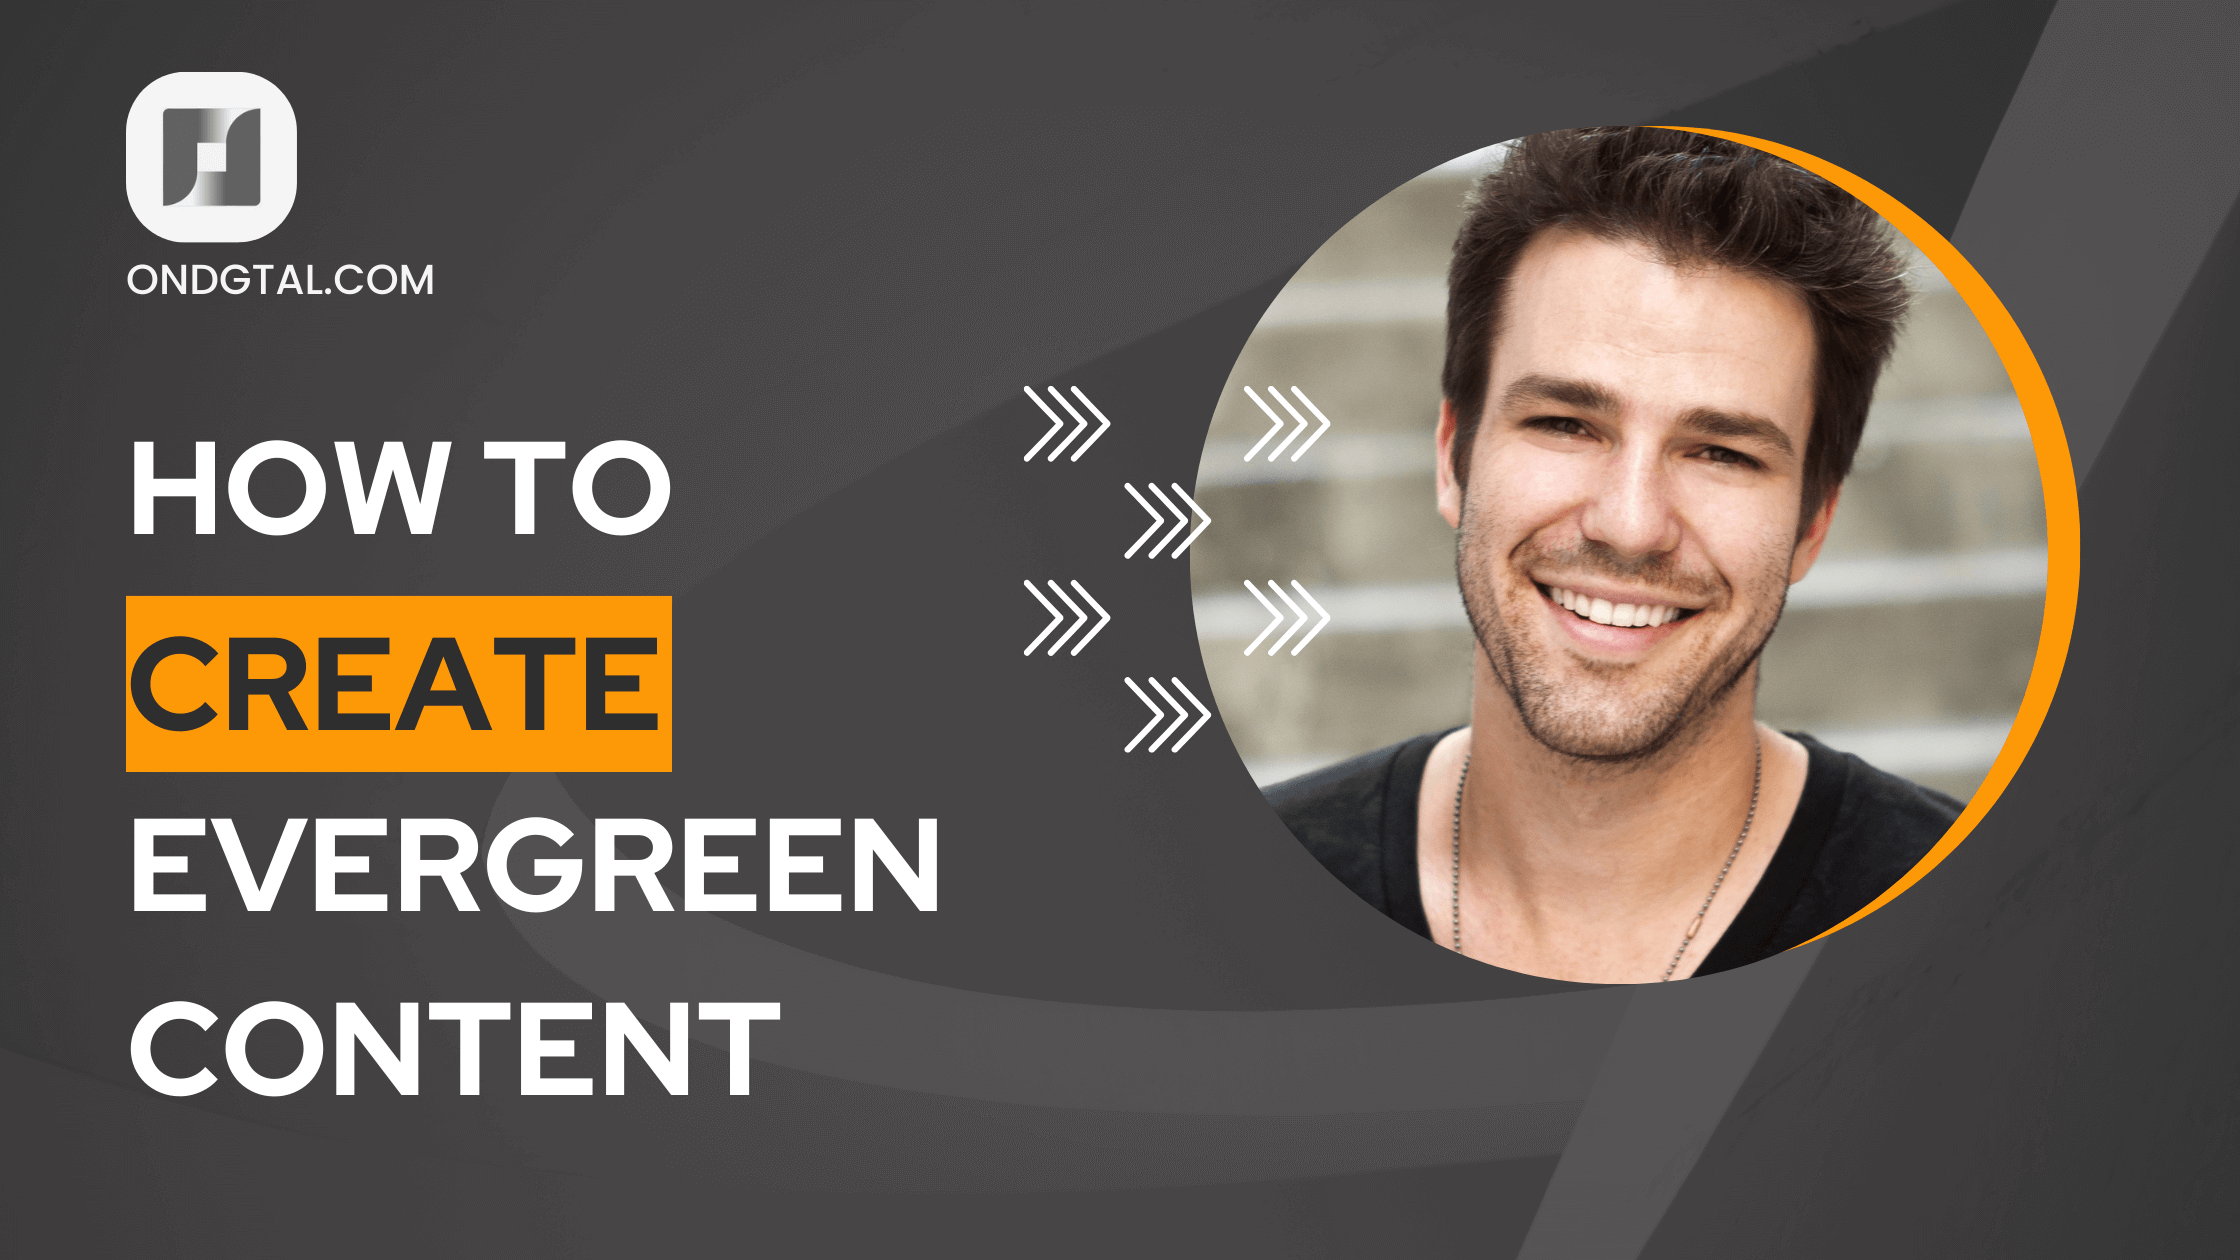 How to create evergreen content